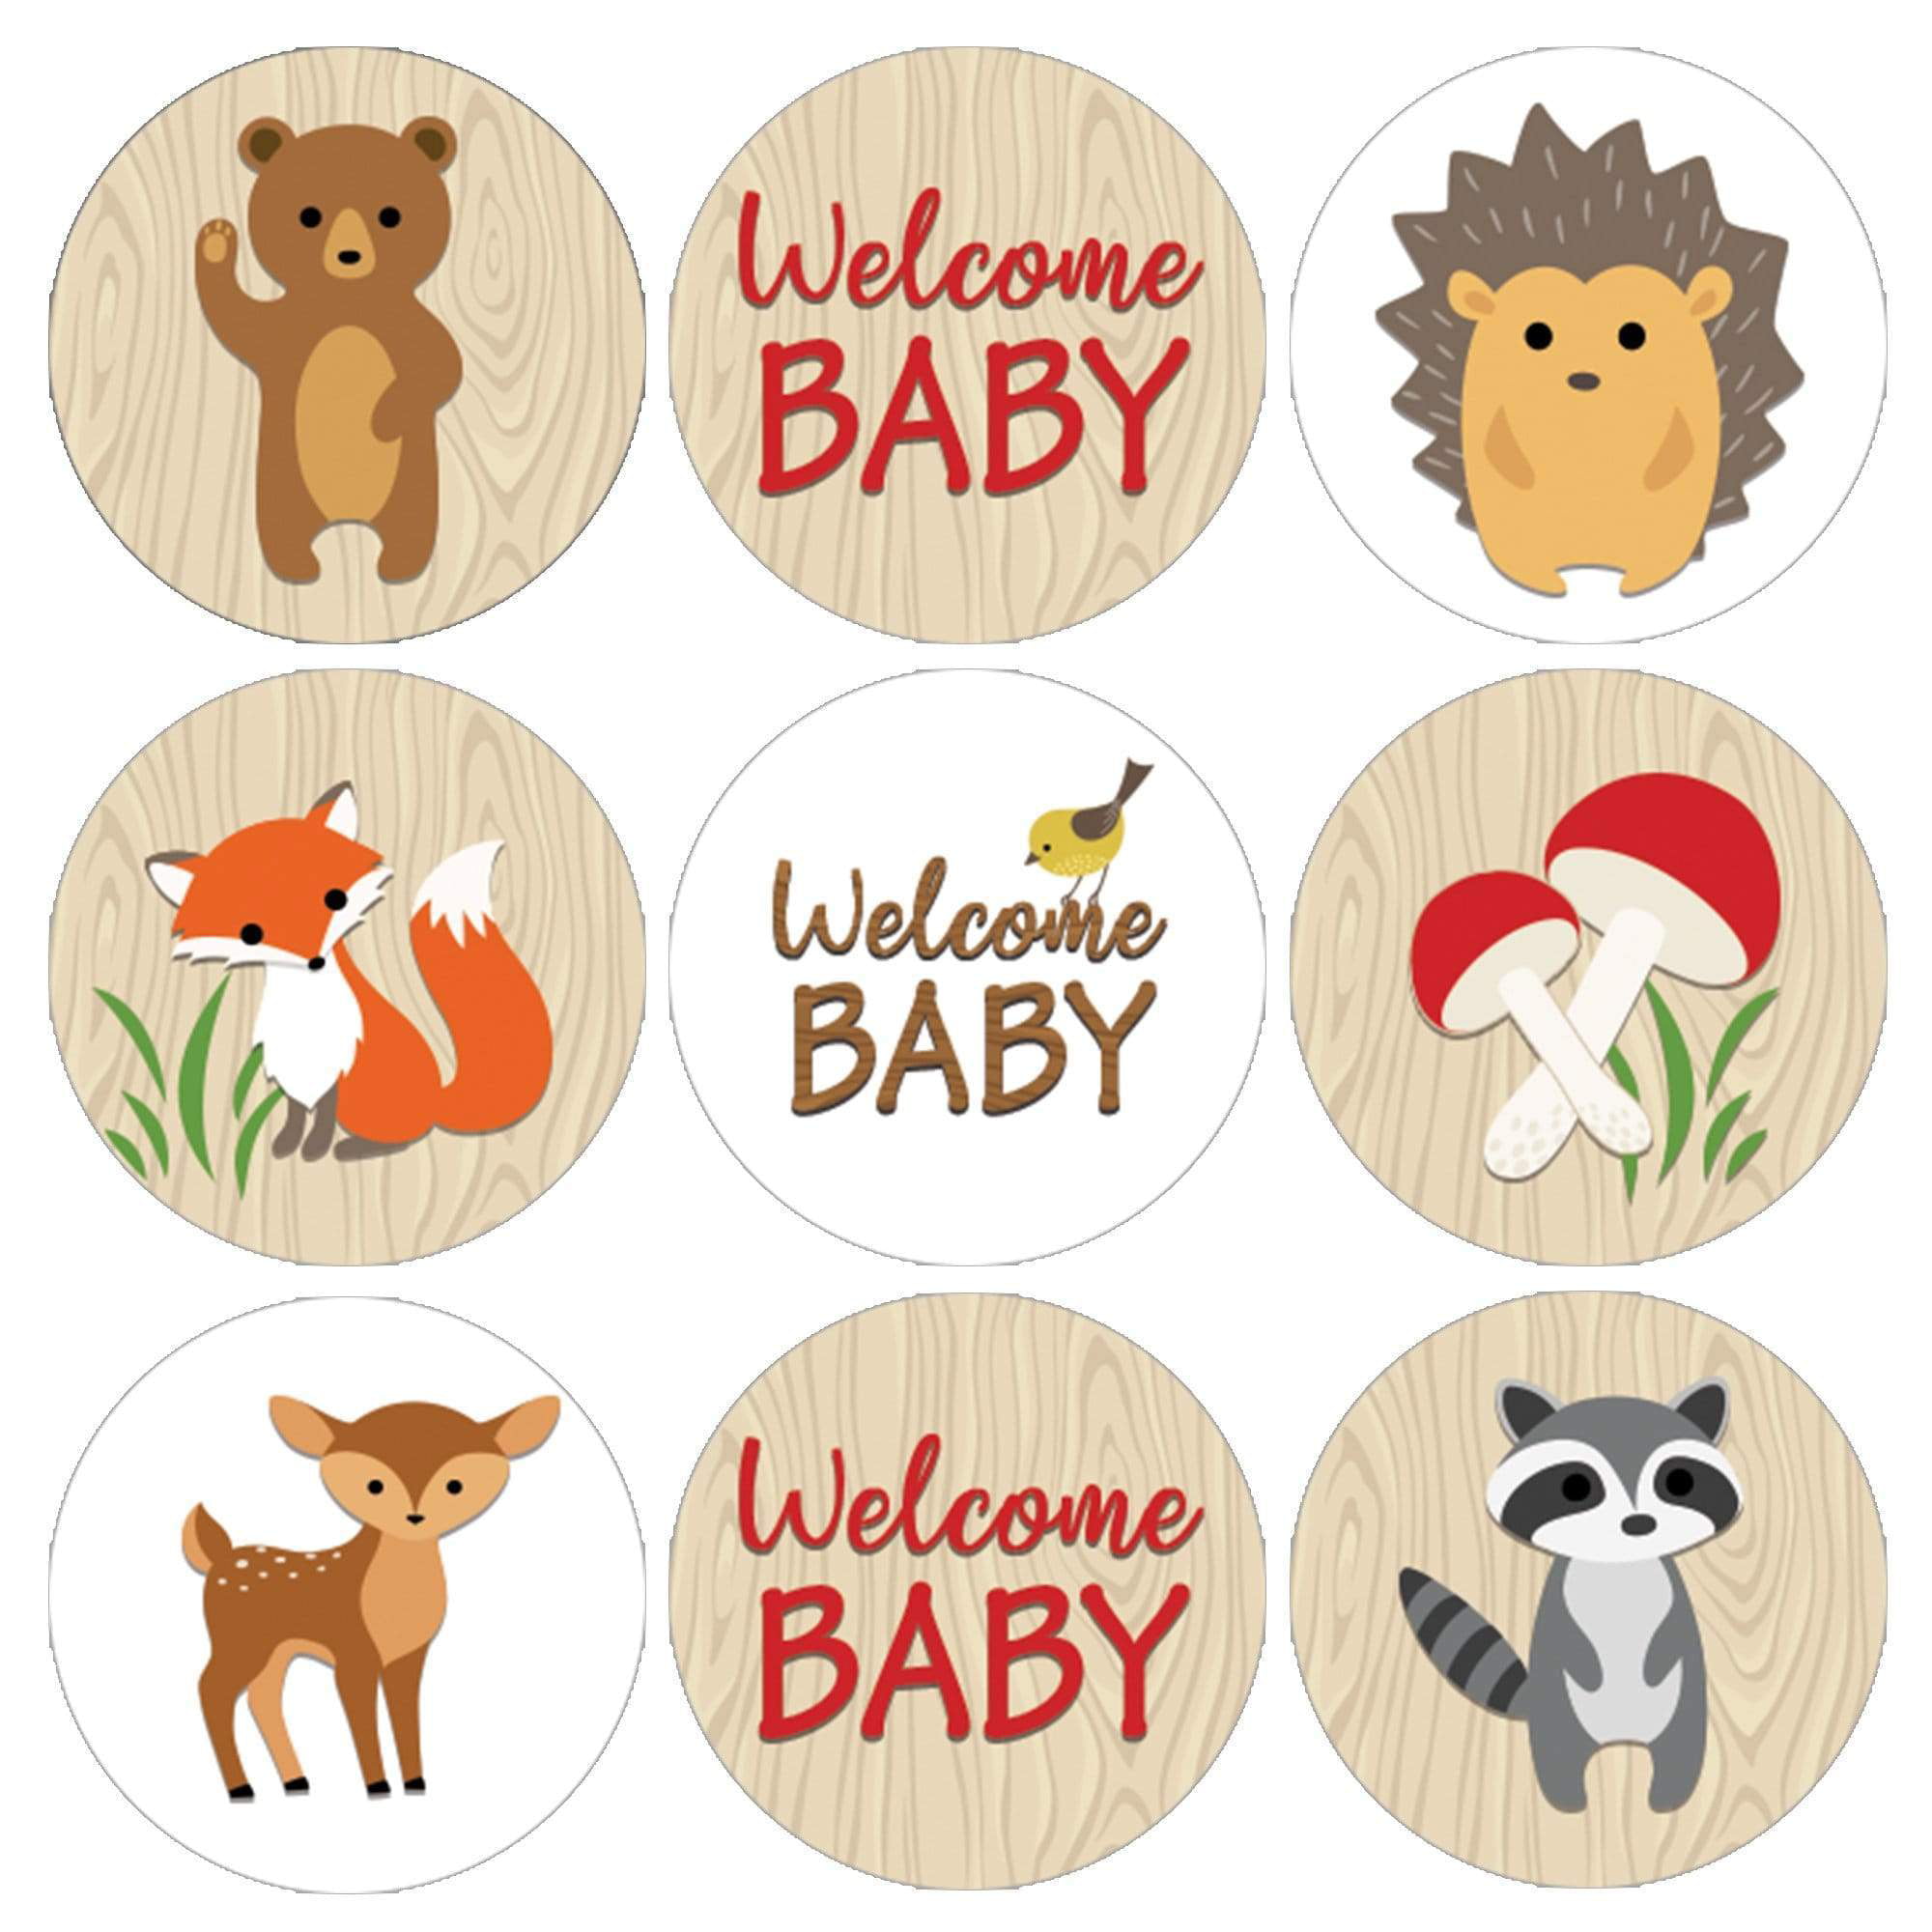 Woodland Creatures Baby Shower Personalized Round Stickers 24 Stickers Total